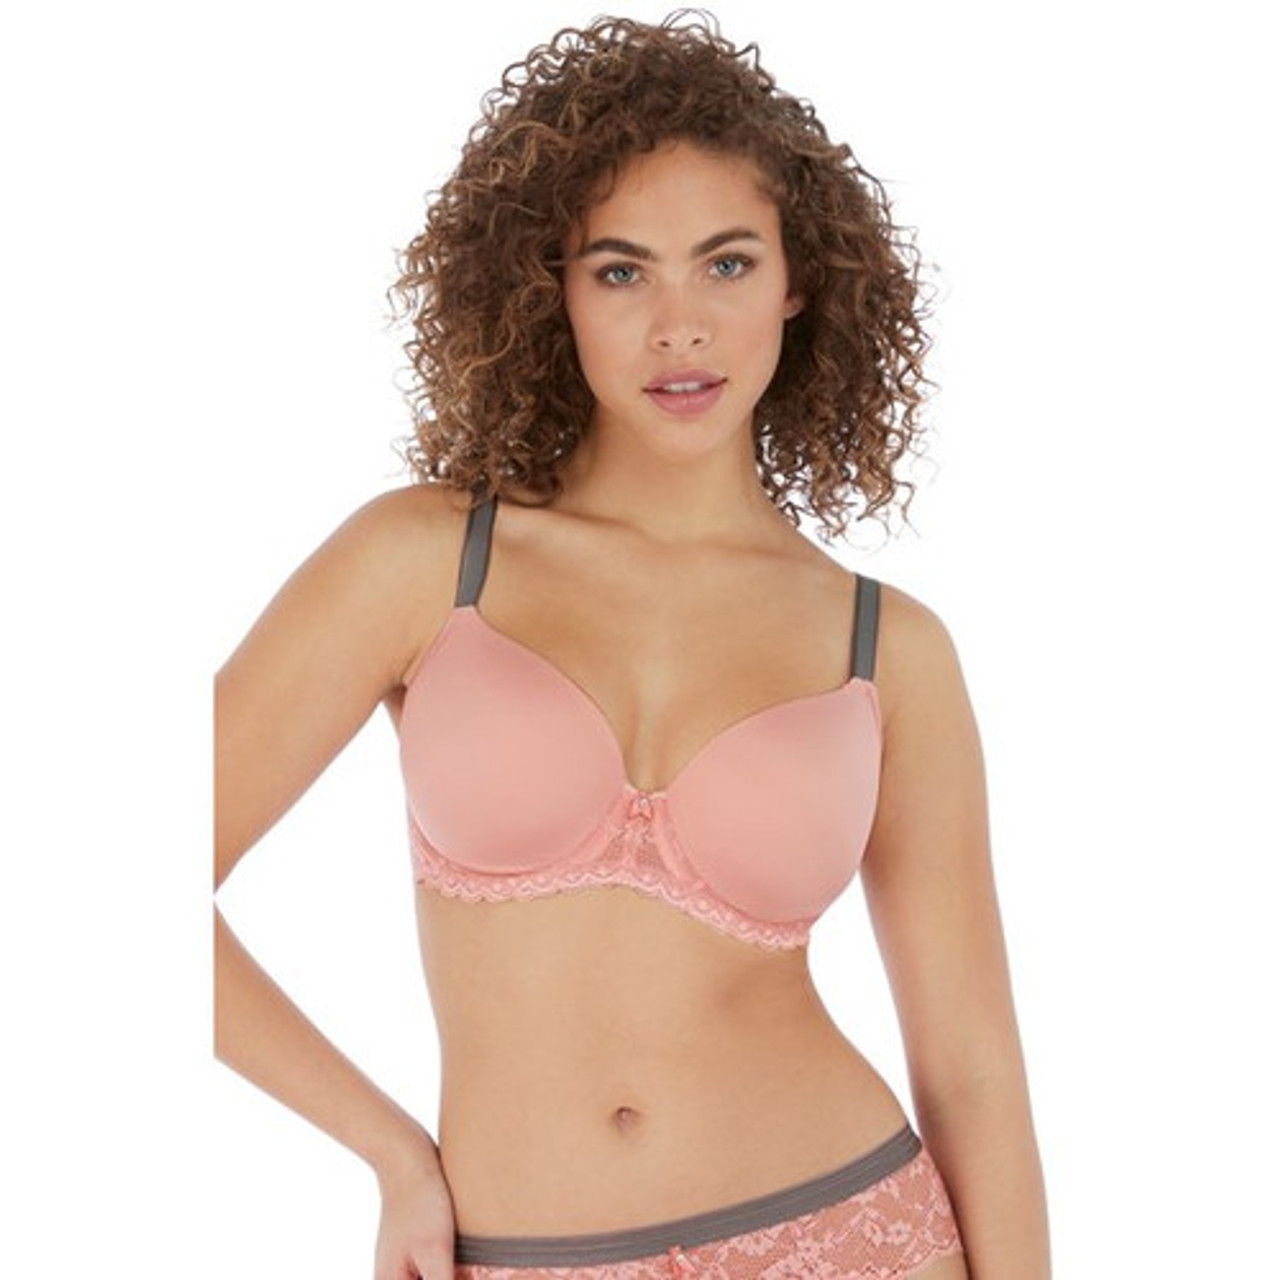 kaya intimatas Women Stick-on Heavily Padded Bra - Buy kaya intimatas Women  Stick-on Heavily Padded Bra Online at Best Prices in India